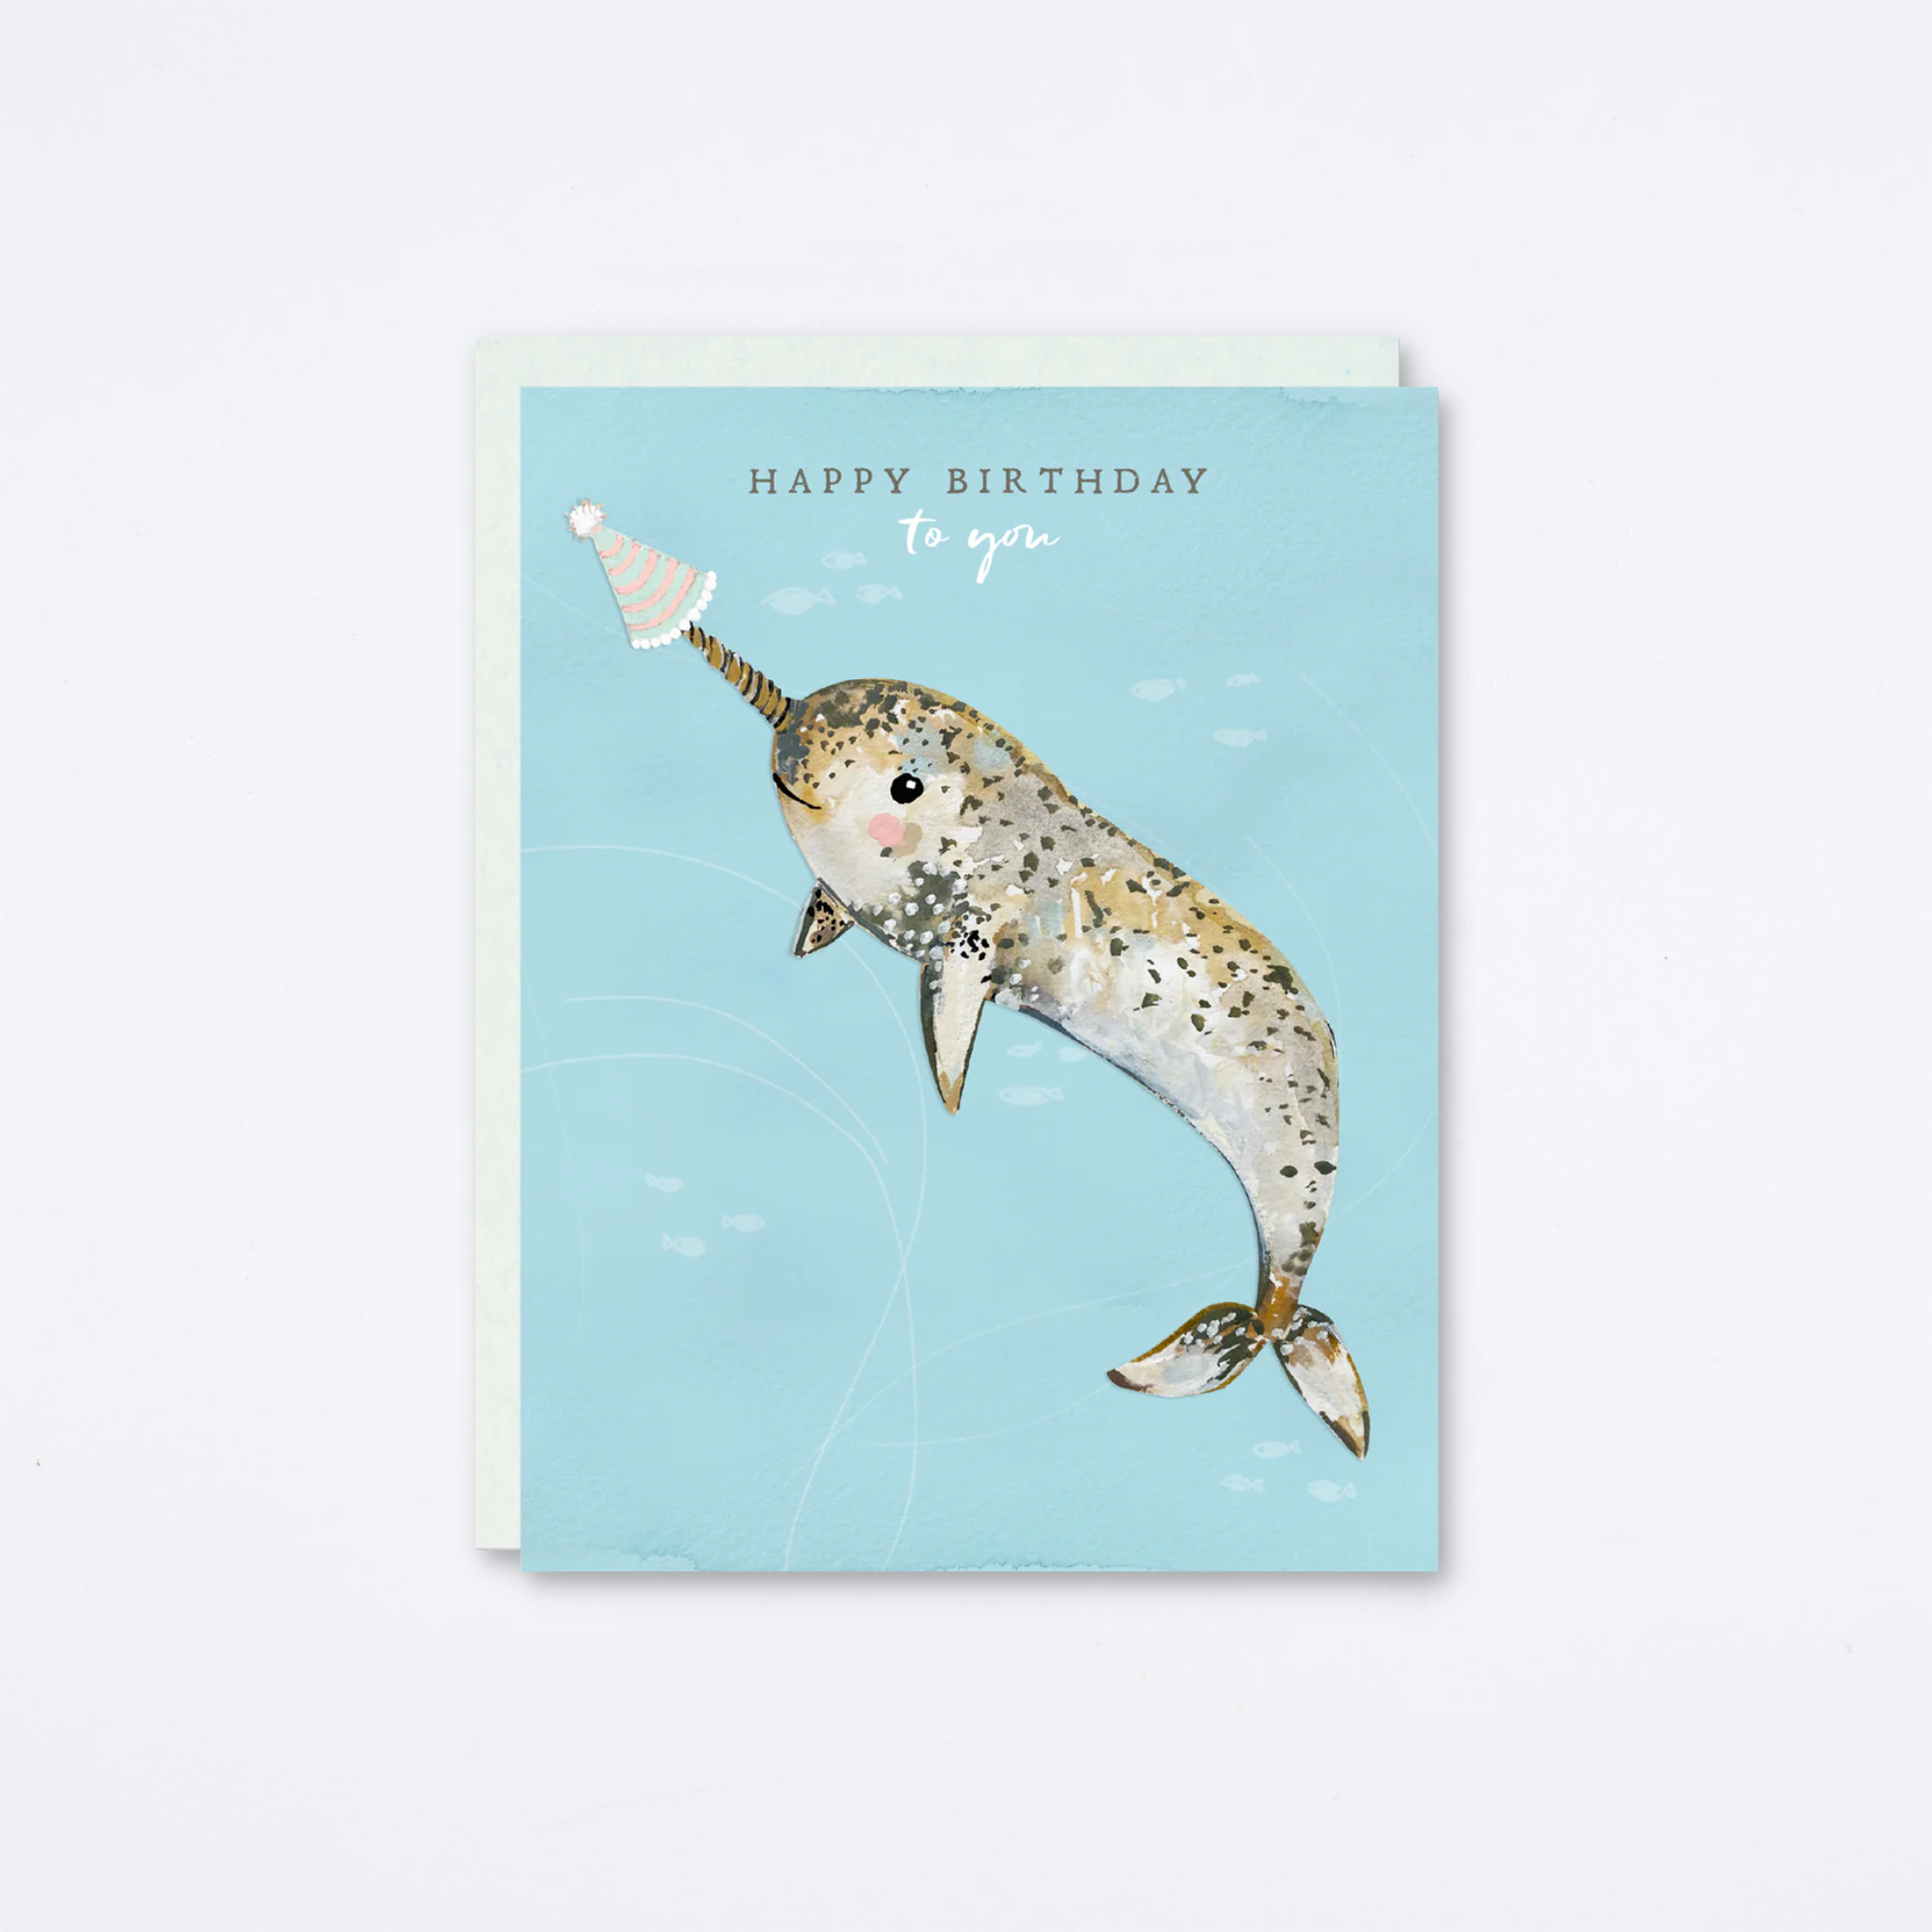 Happy Birthday, Narwhal Card